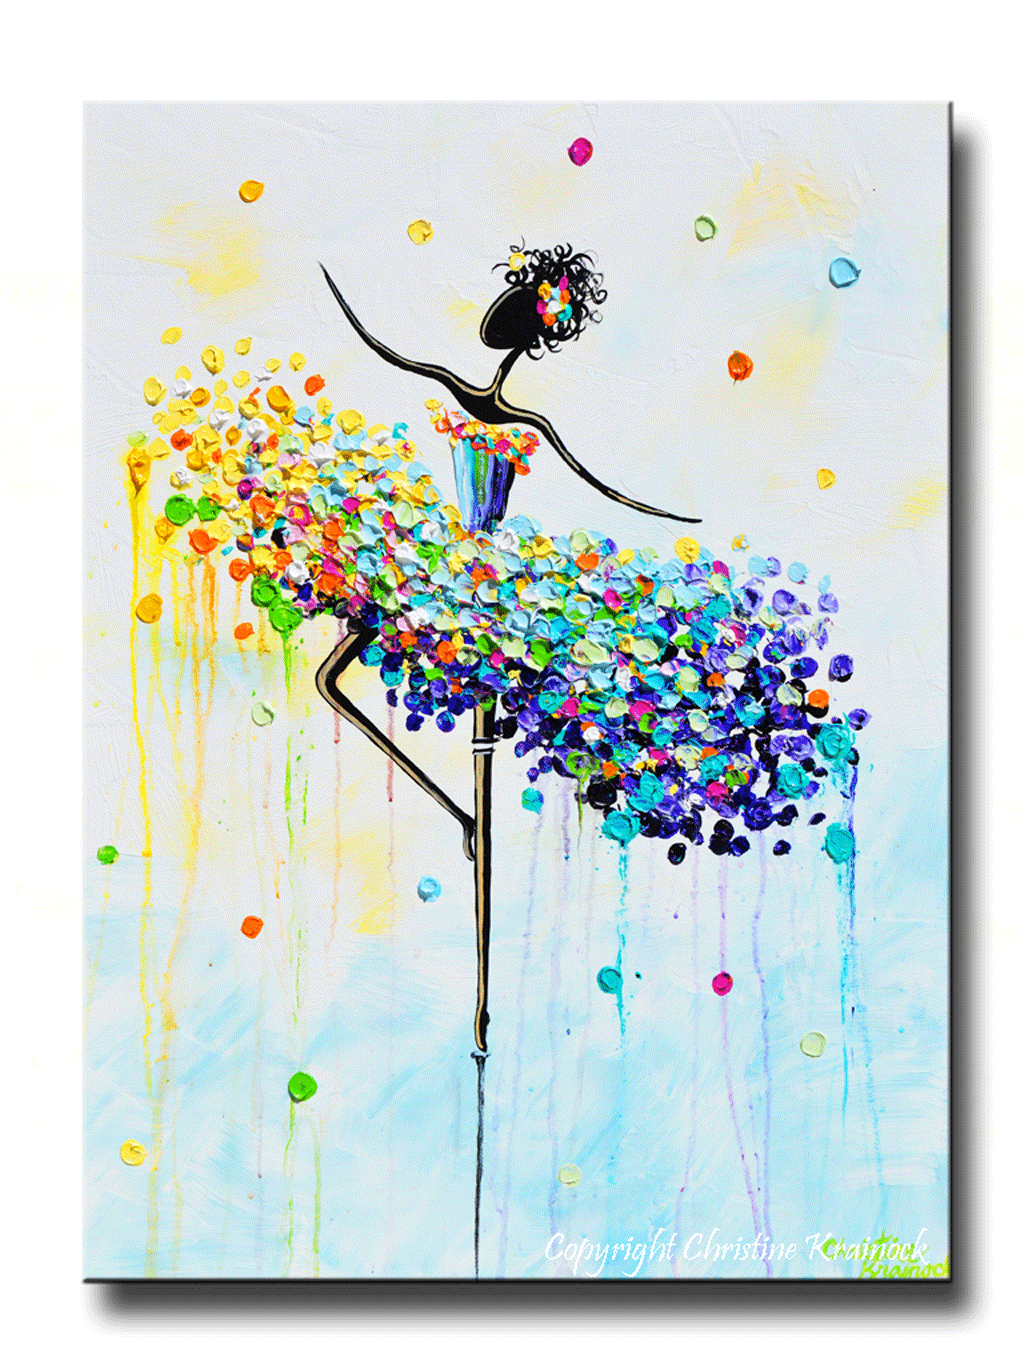 Abstract Figurative Painting on Canvas Original Woman Portrait Wall Art  Colorful Artwork Modern Impasto Painting for Living Room Decor | MODERN